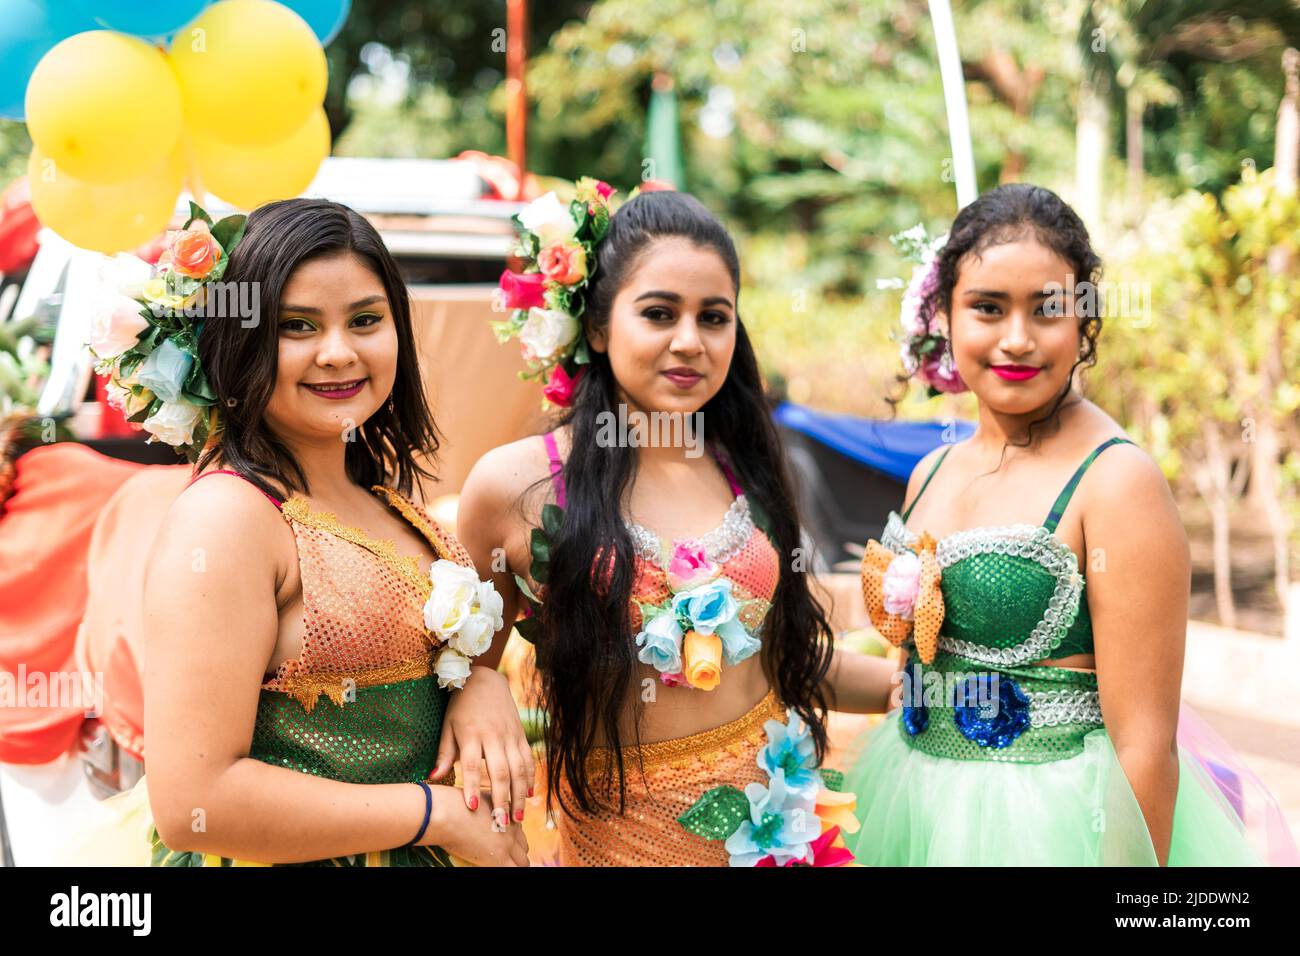 Latin teenagers dressed in classic carnival costume during an agriculture and harvest festival Stock Photo